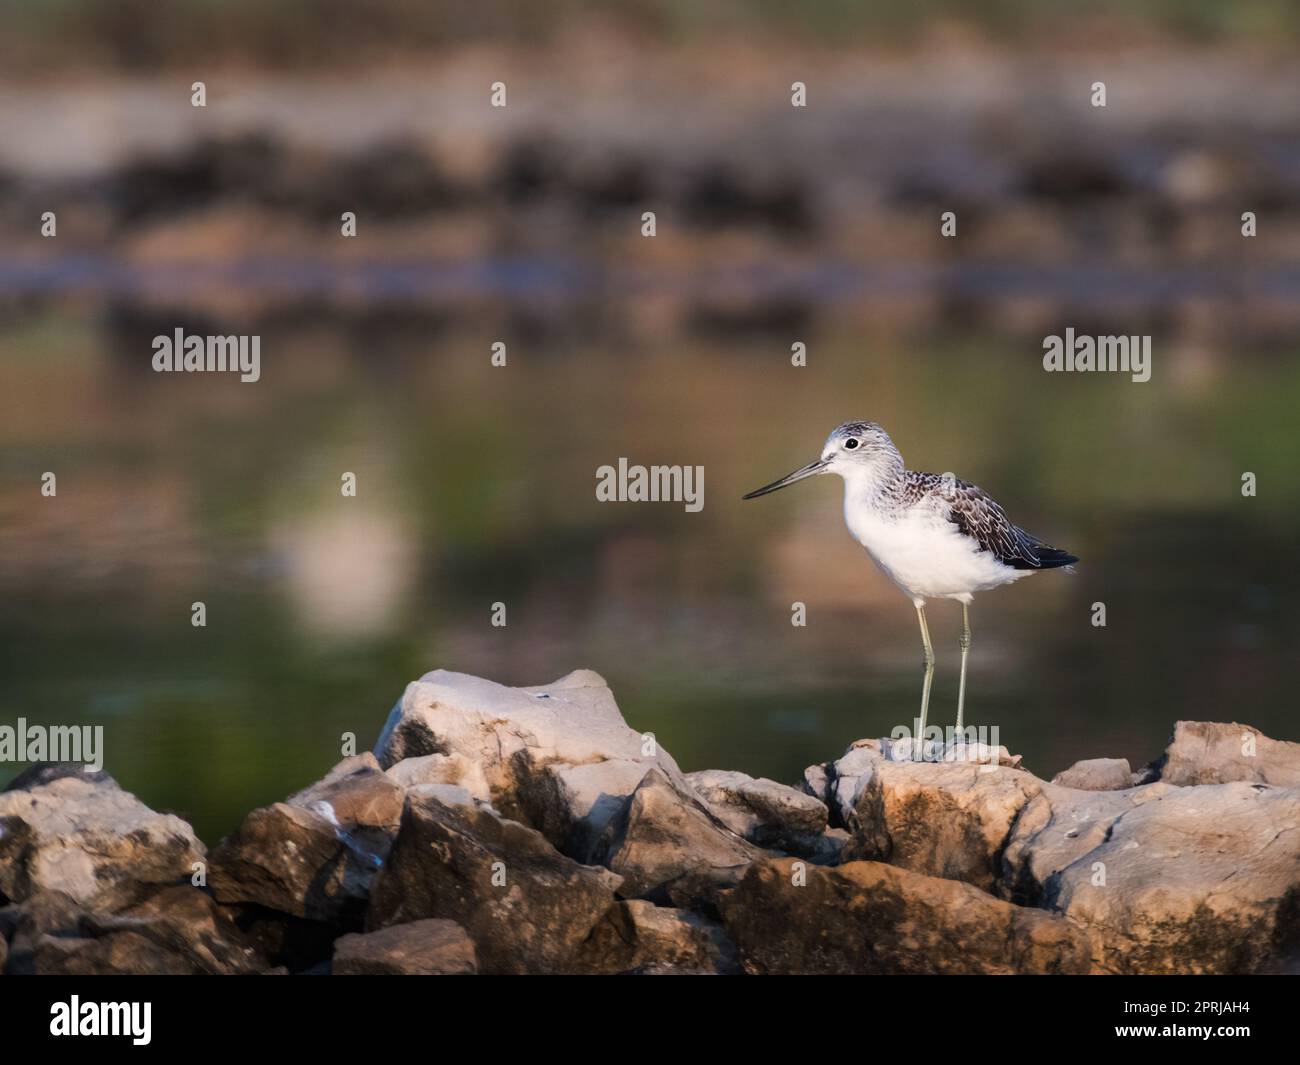 Green Sandpiper (Tringa ochropus) is a small Wader Shorebird of the Old World. Bird Wading in Shallow Water of Wetland during Migration. Wildlife Scene of Nature in Europe. Stock Photo